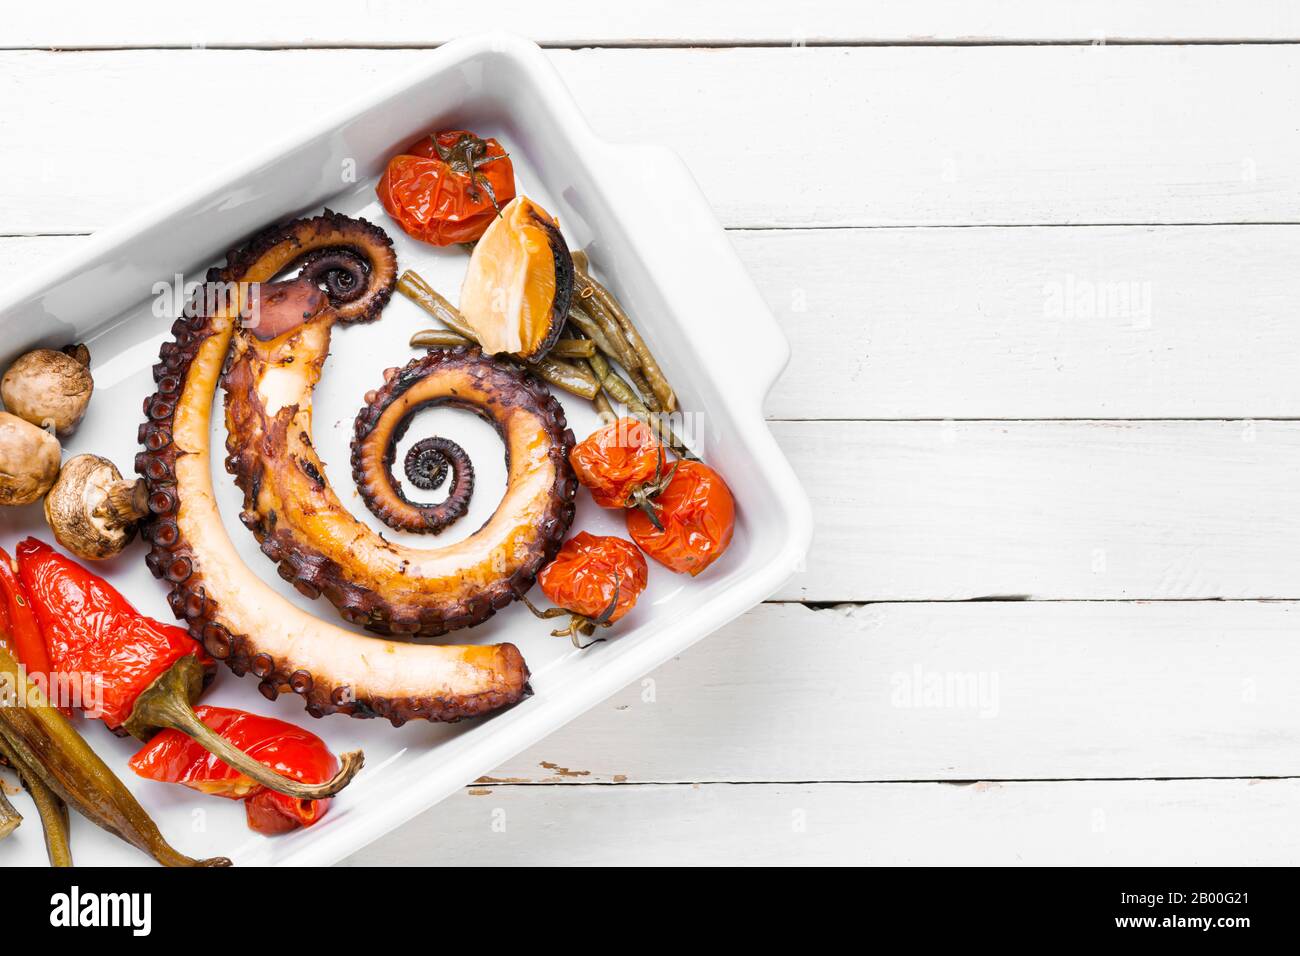 Grilled octopus with roasted vegetables in baking dish Stock Photo